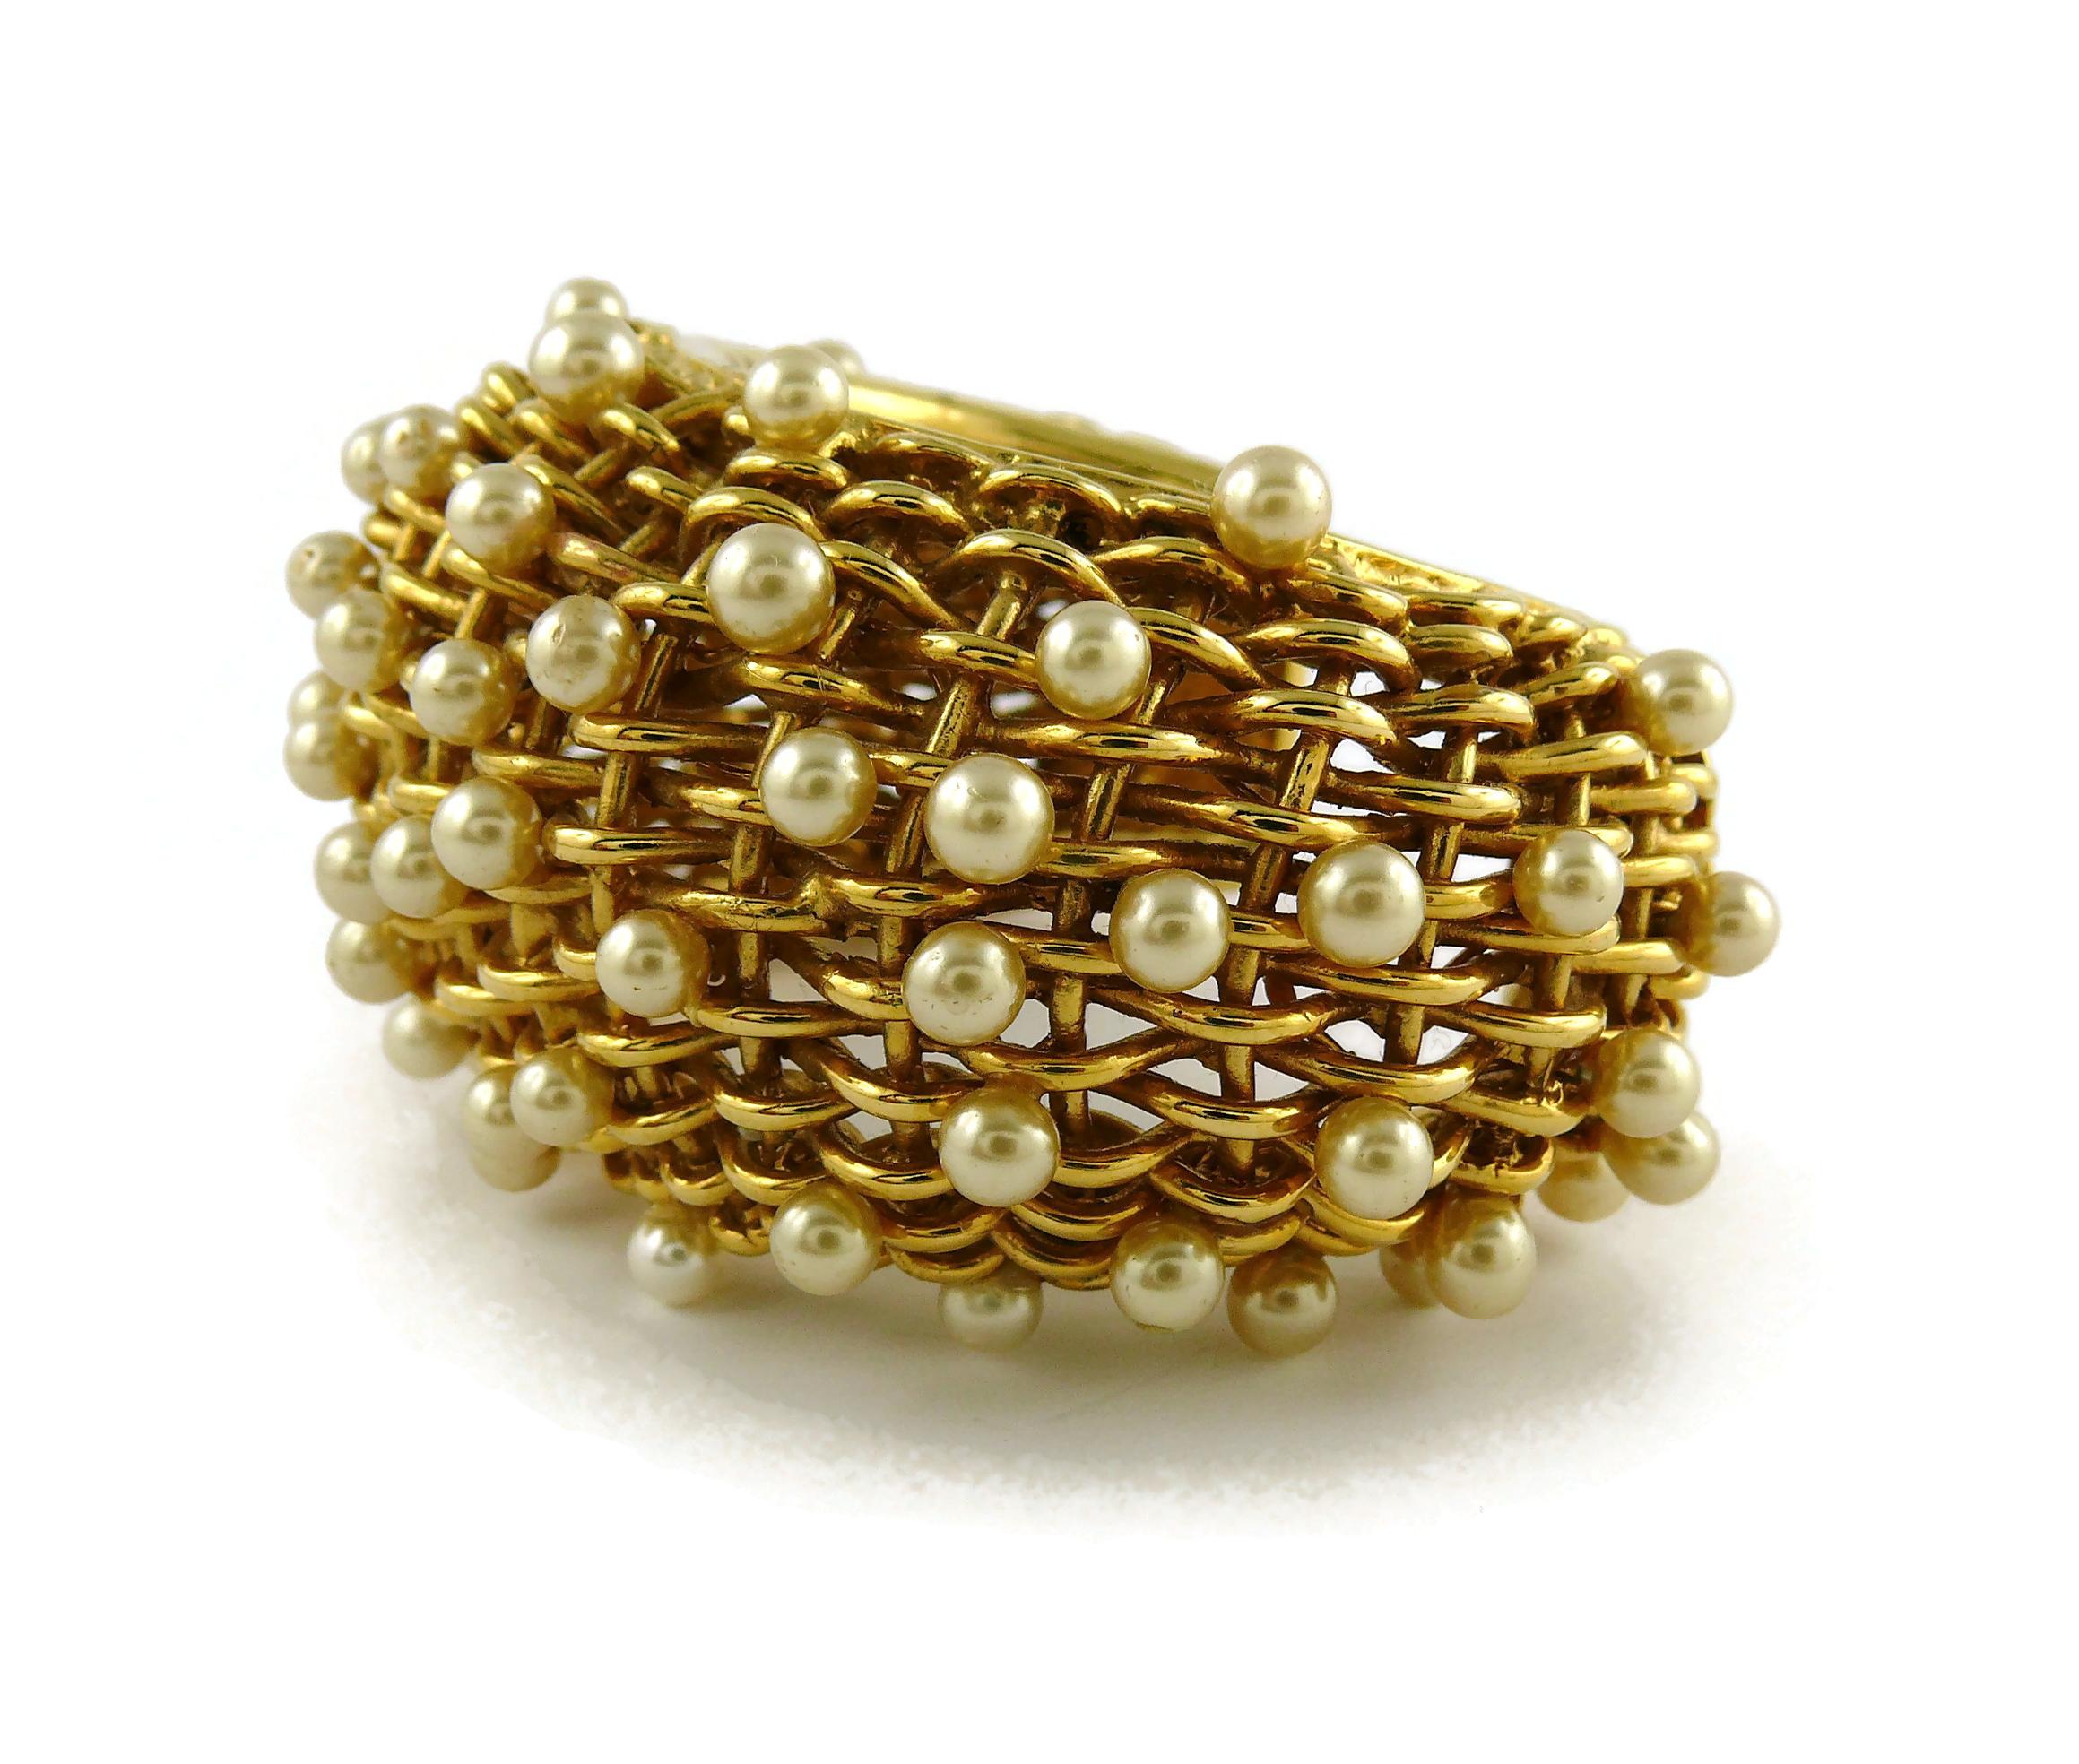 Chanel Vintage 1988 Gold Toned Braided Pearl Wide Cuff Bracelet For Sale 2